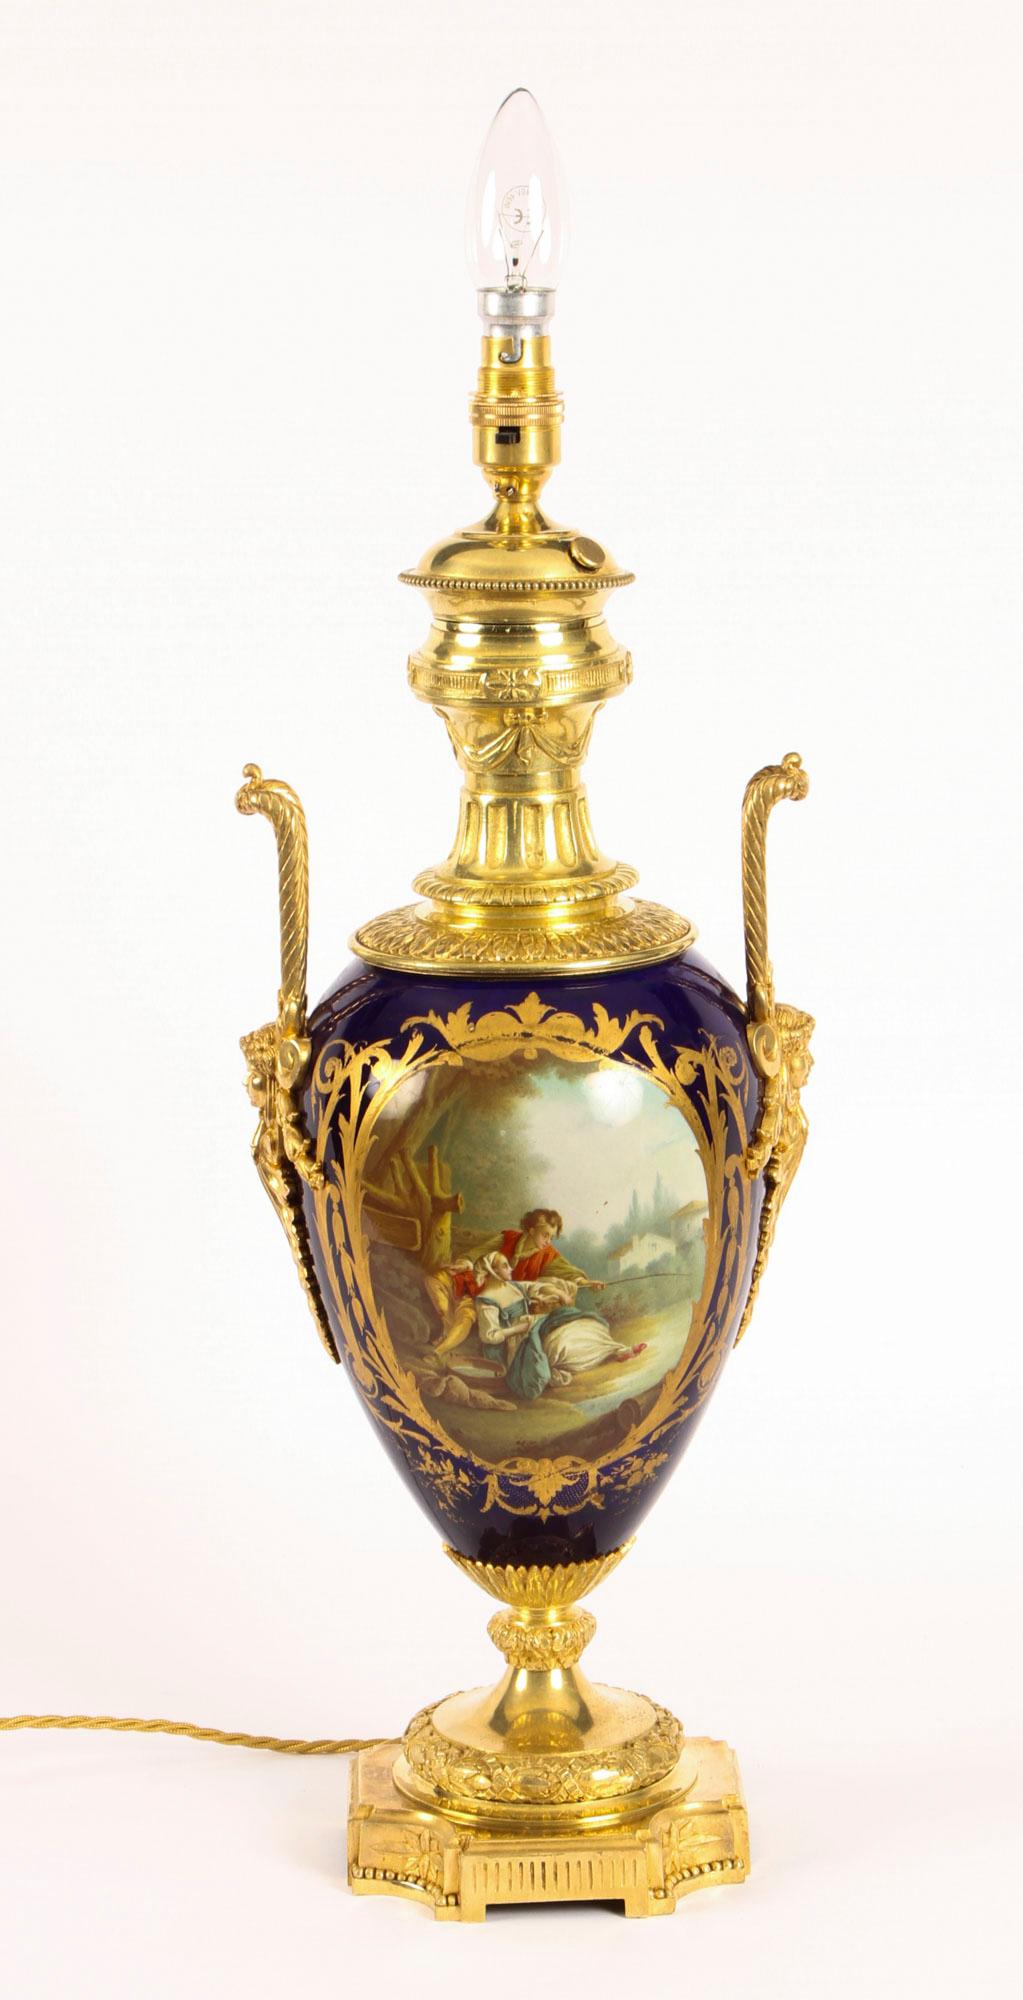 This is a stunning large antique French Sevres cobalt blue hand painted porcelain and ormolu-mounted vase circa 1880 in date, later converted into a lamp.

The vase shaped porcelain body is painted with gilt-framed panels depicting a classical